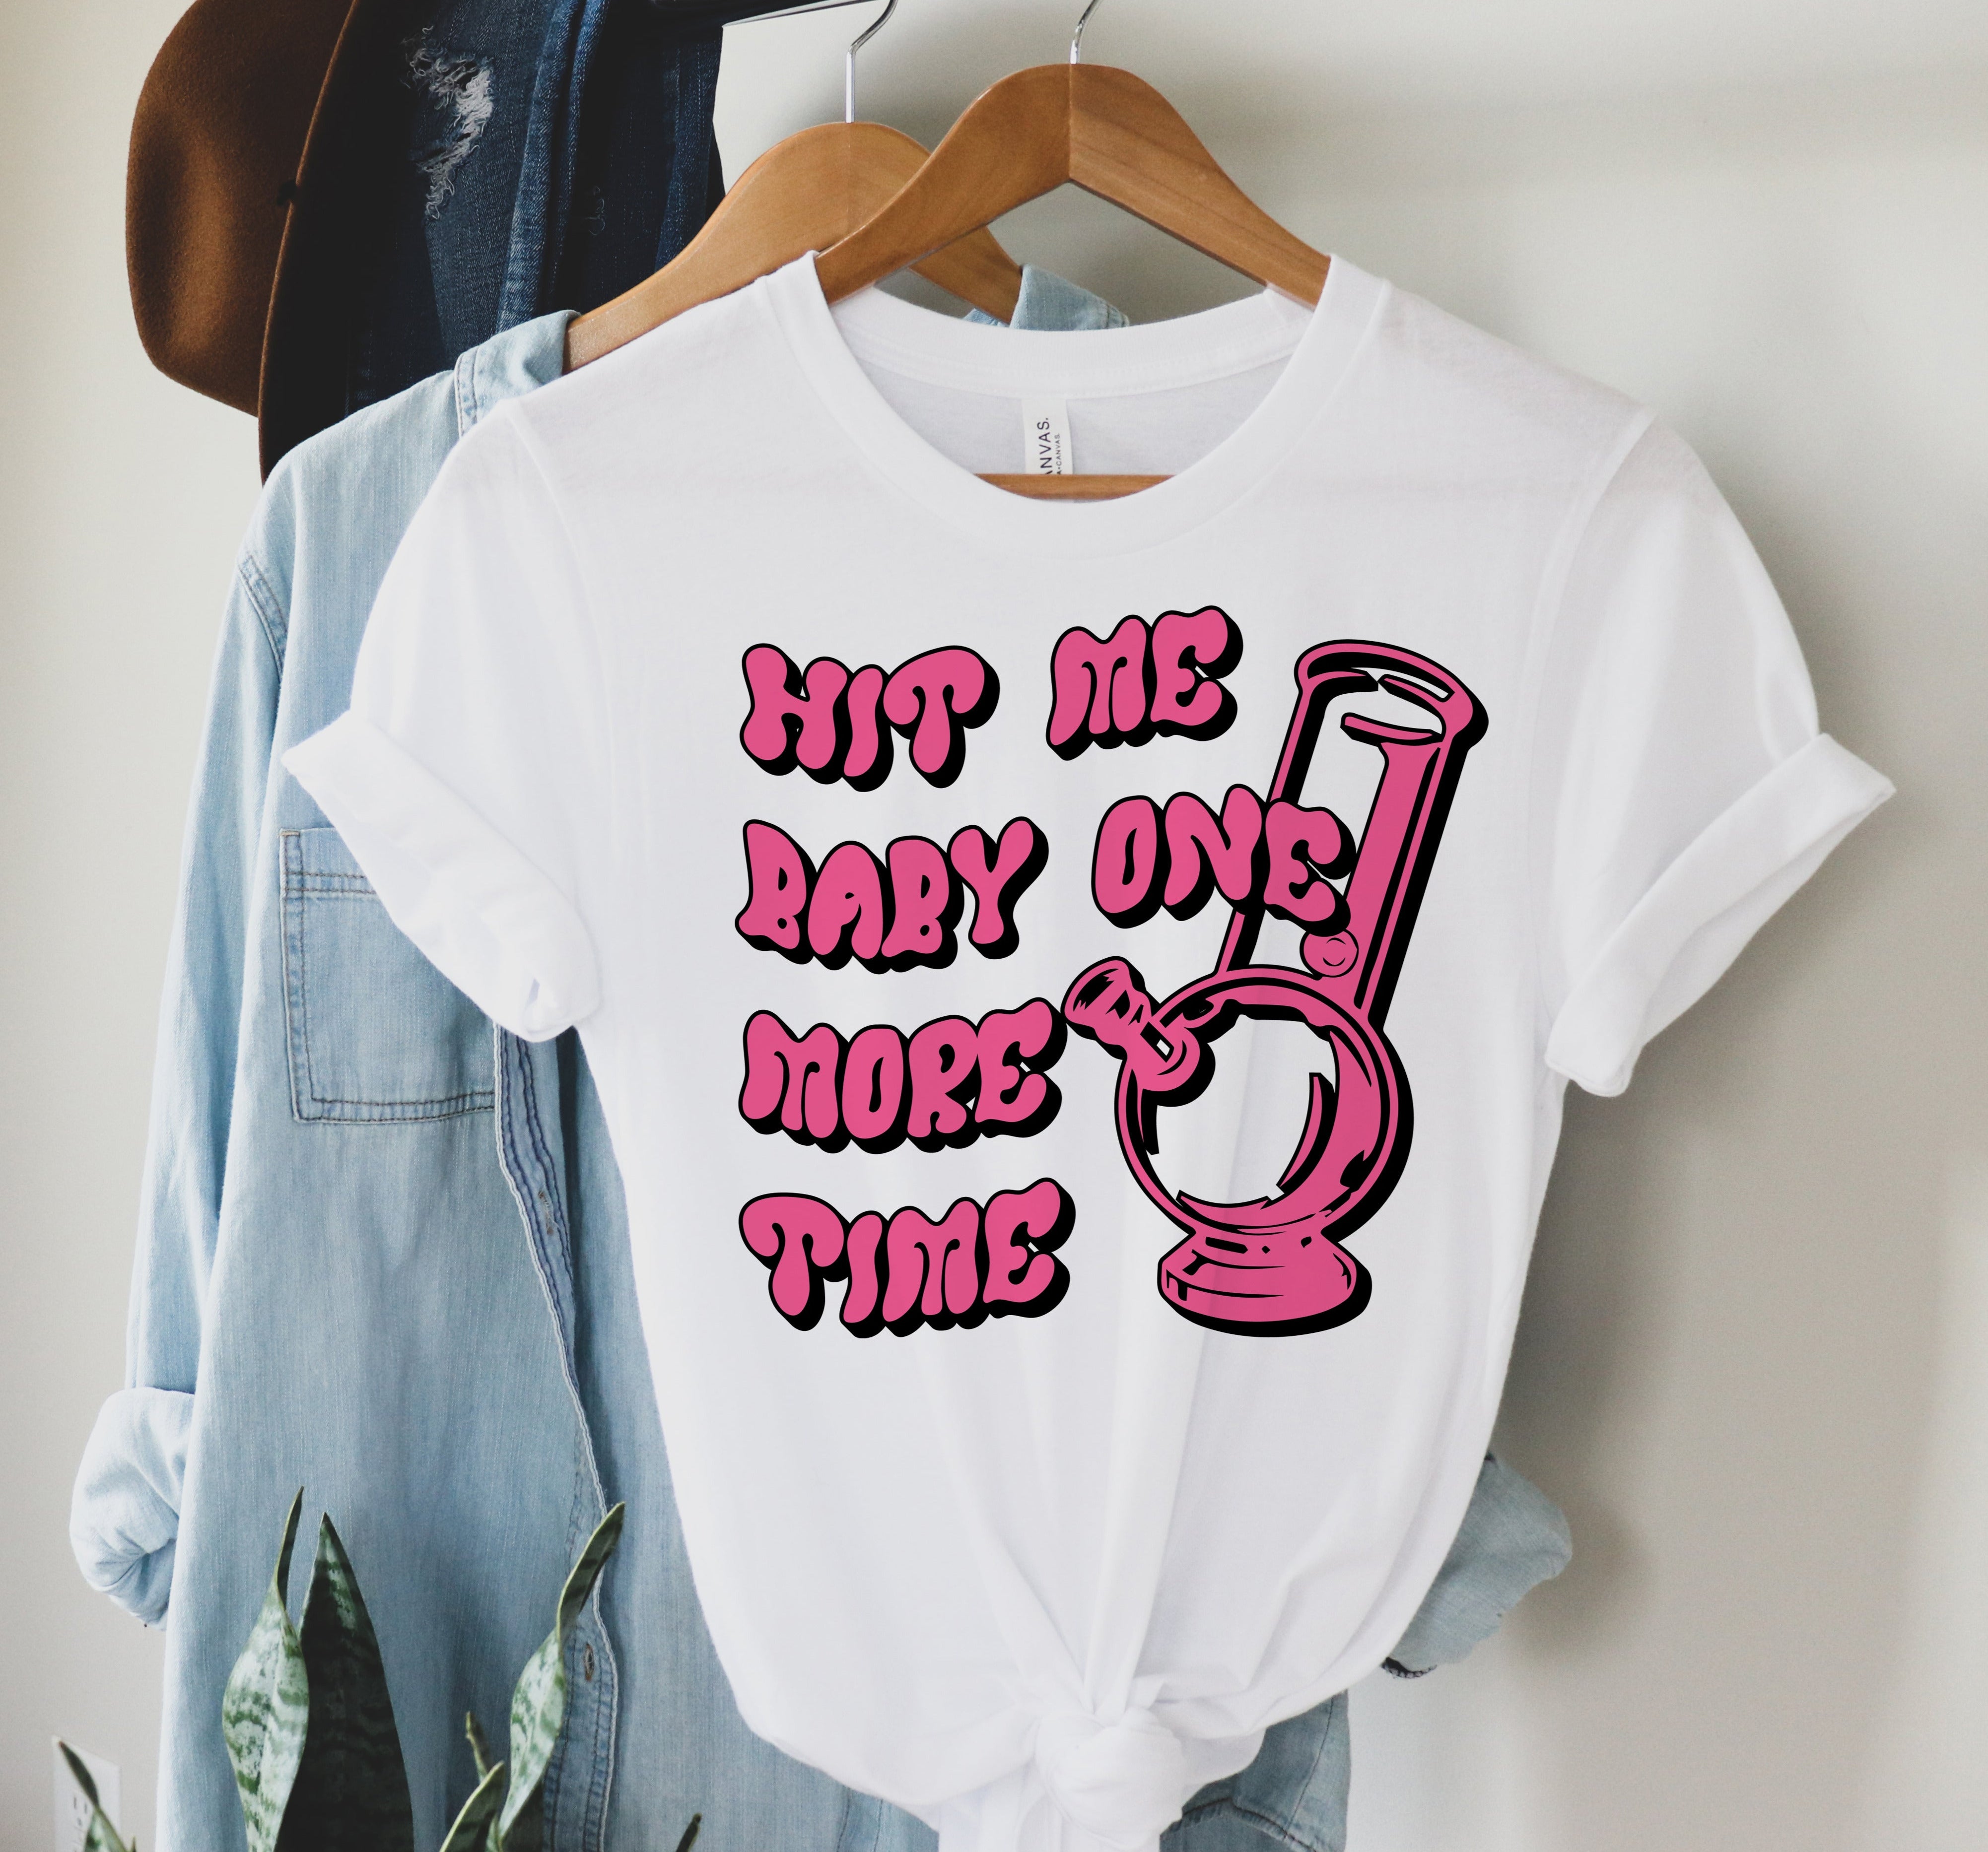 funny cannabis shirt that says hit me baby one more time - HighCiti